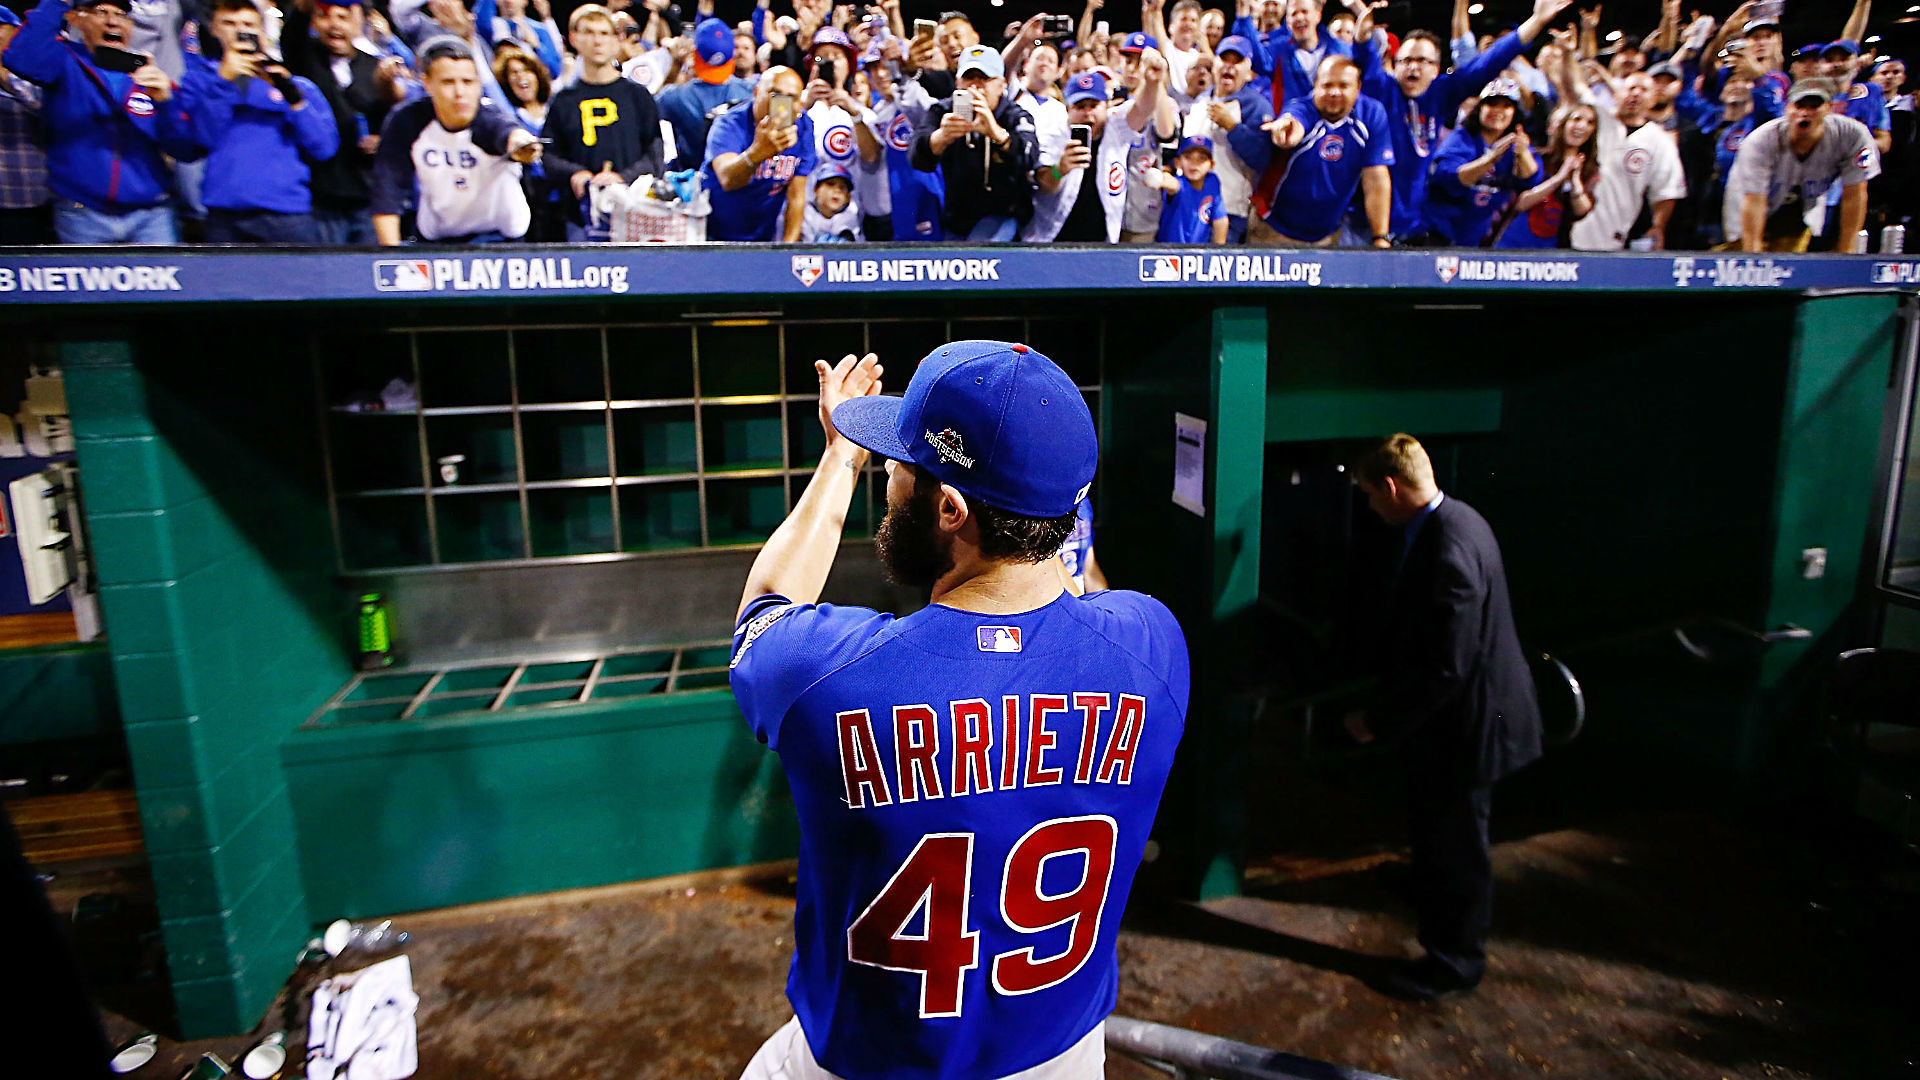 1920x1080 MLB playoffs 2015 picks: Can Cubs fulfill 'Back to the Future' prophecy? |  Sporting News